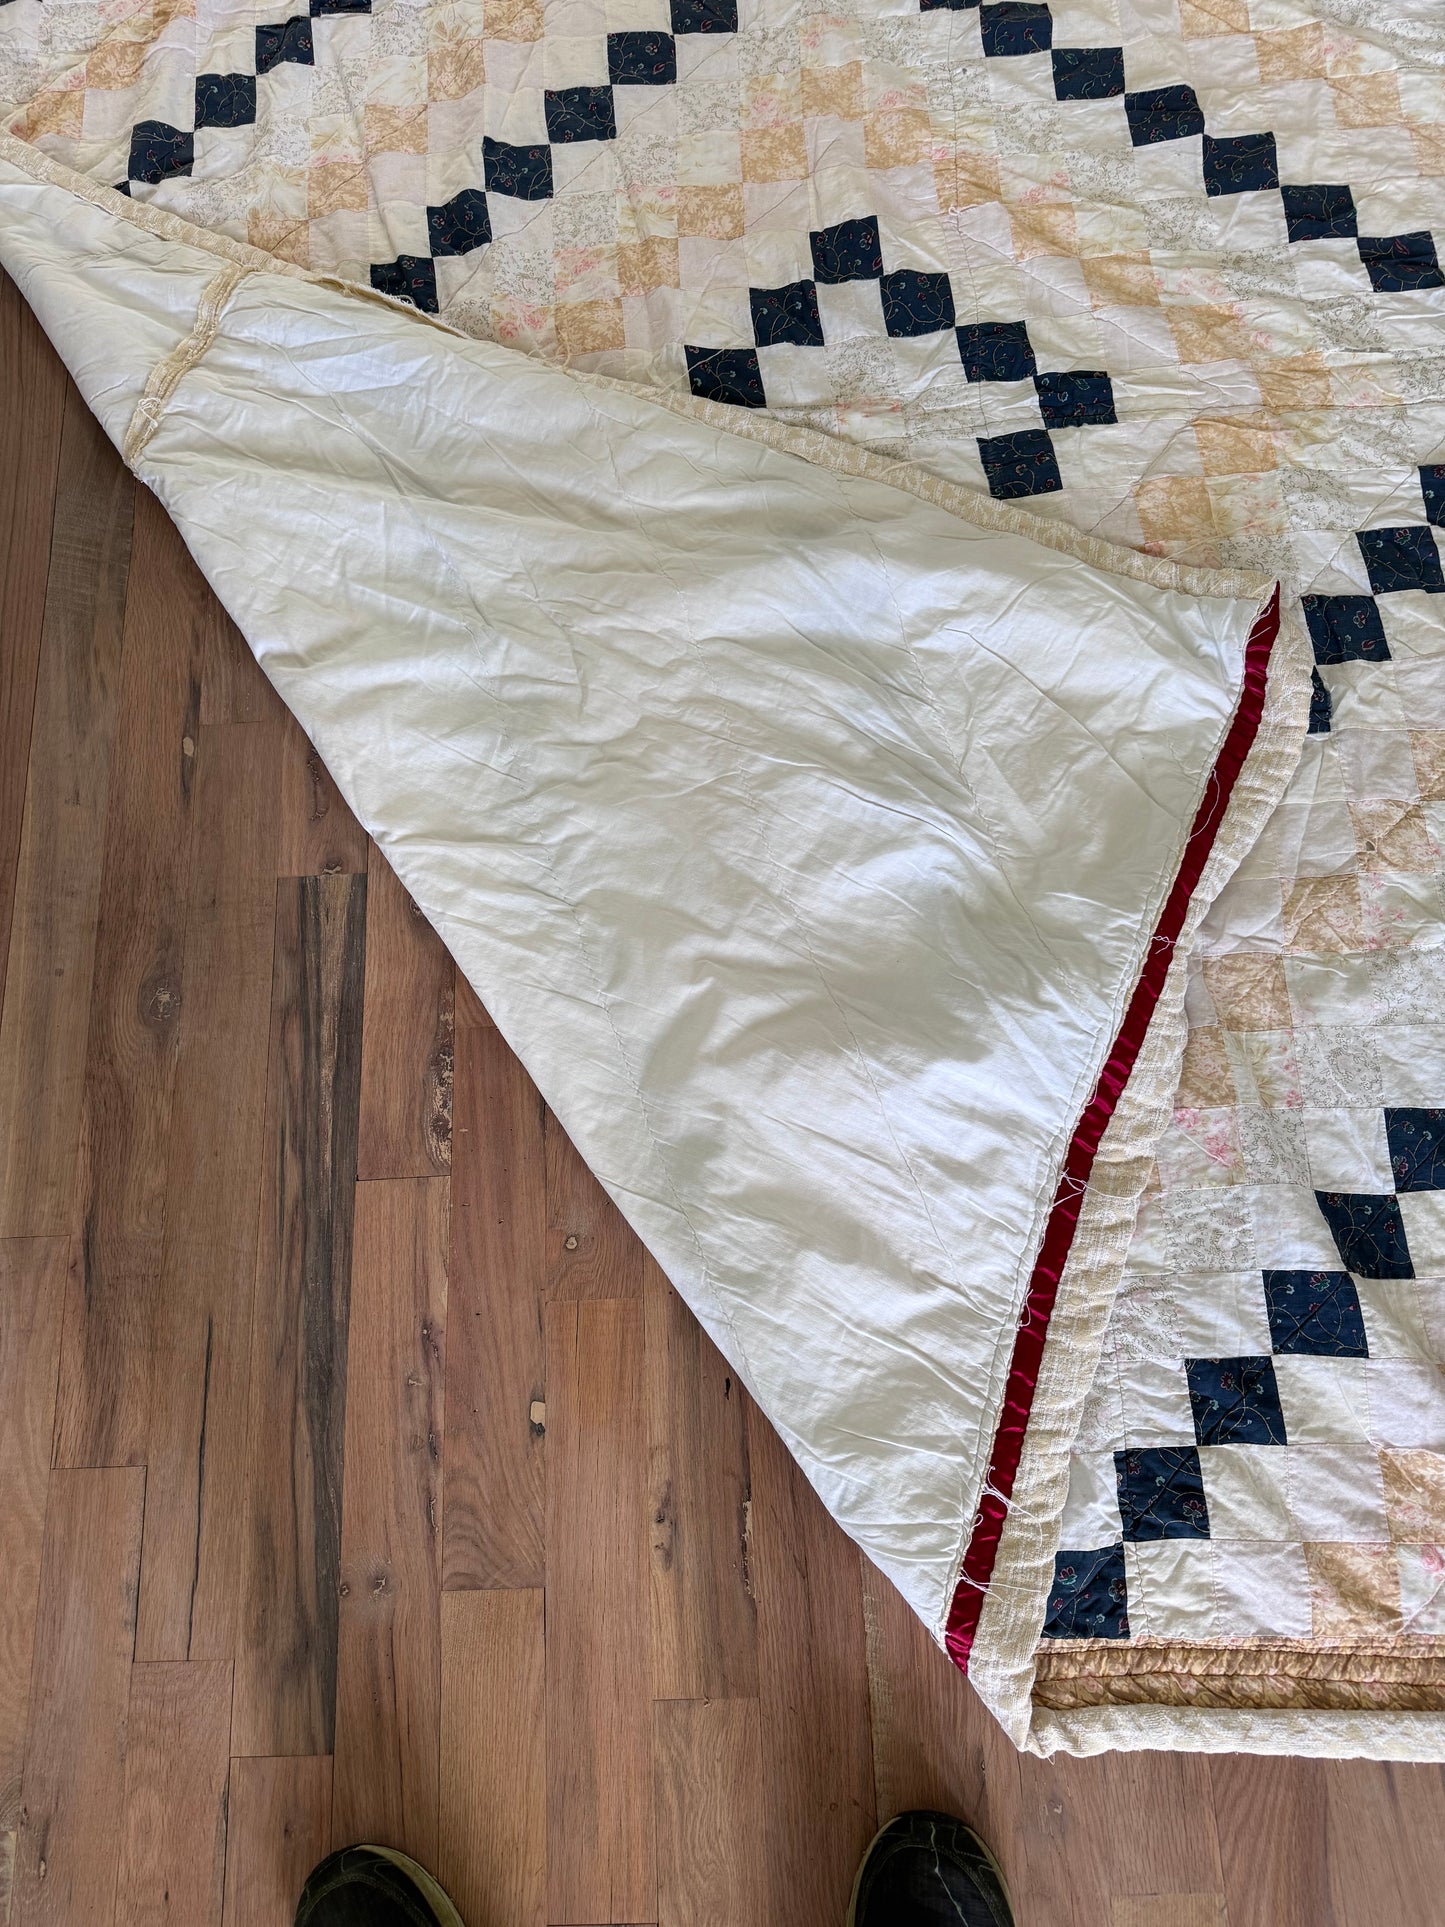 Hand made quilt with diamond pattern - has rips